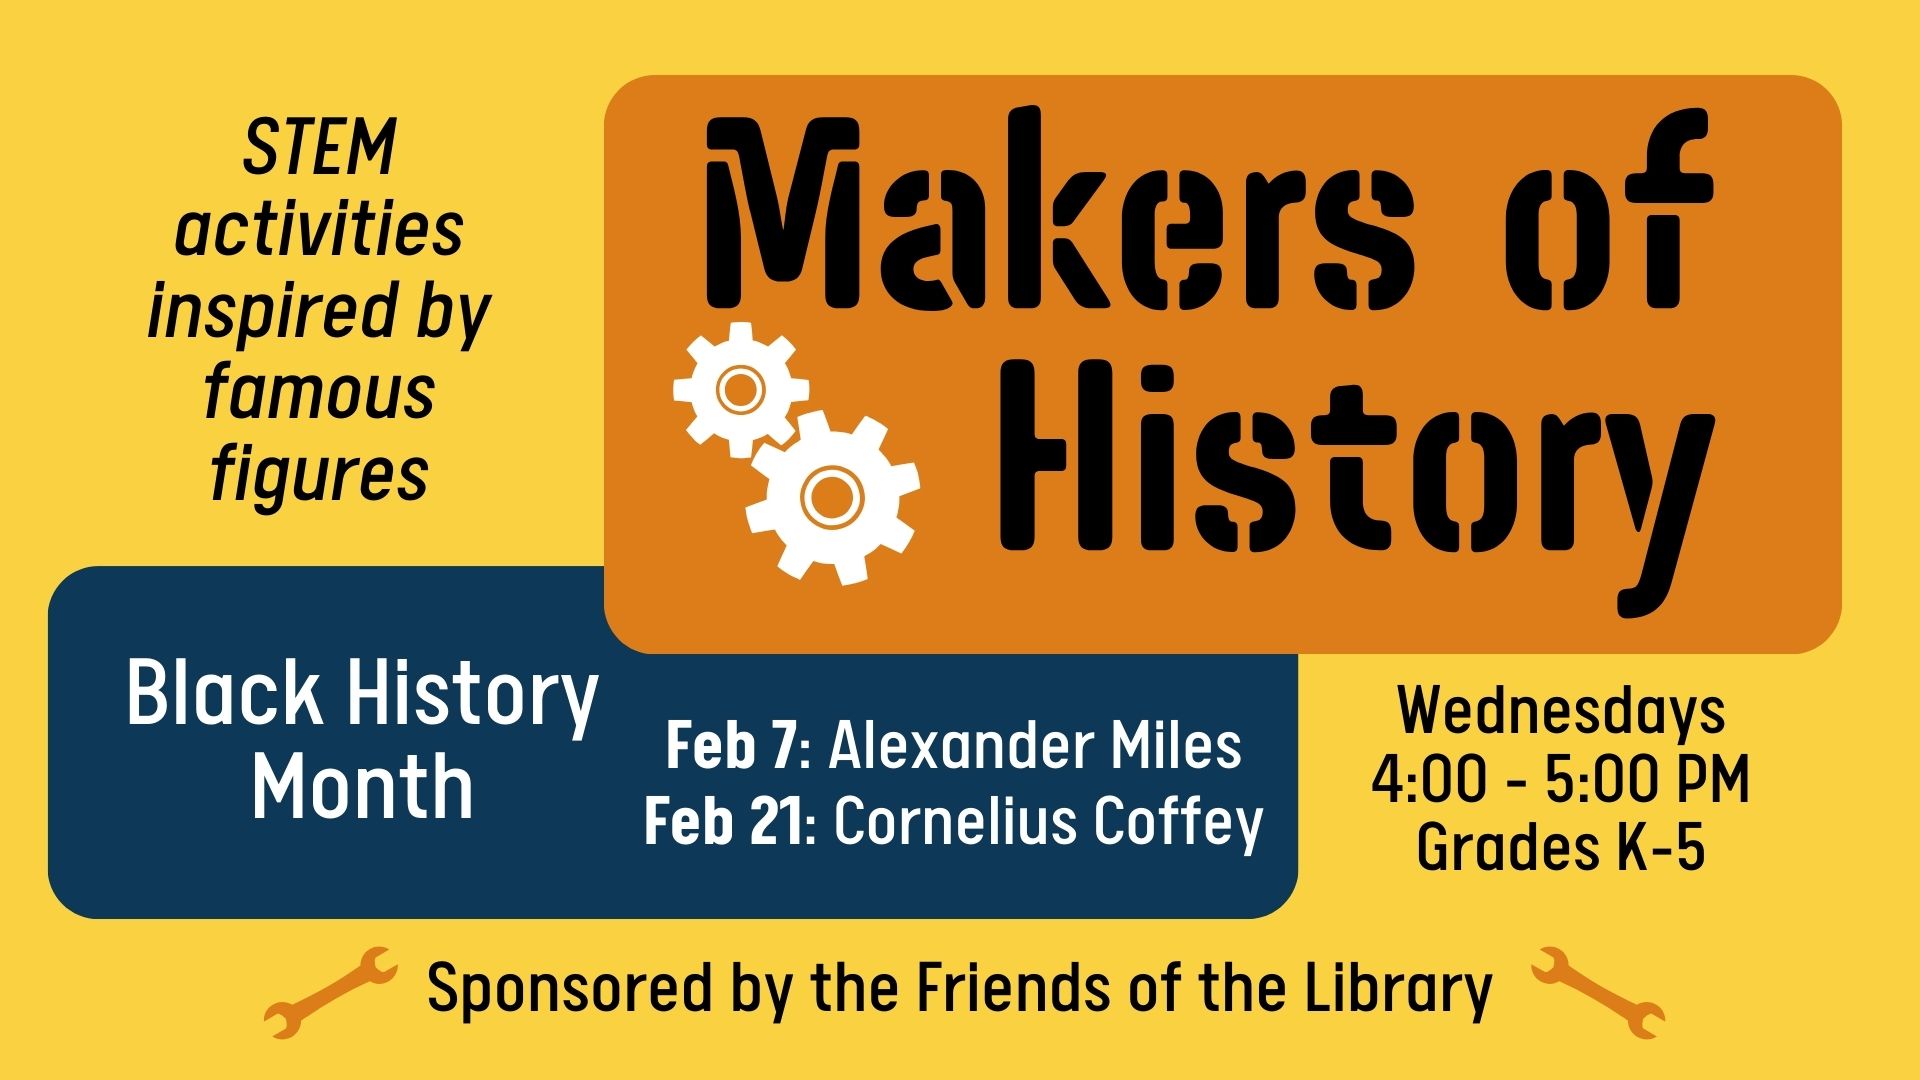 Makers of history event details. Yellow background with gears and wrenches.